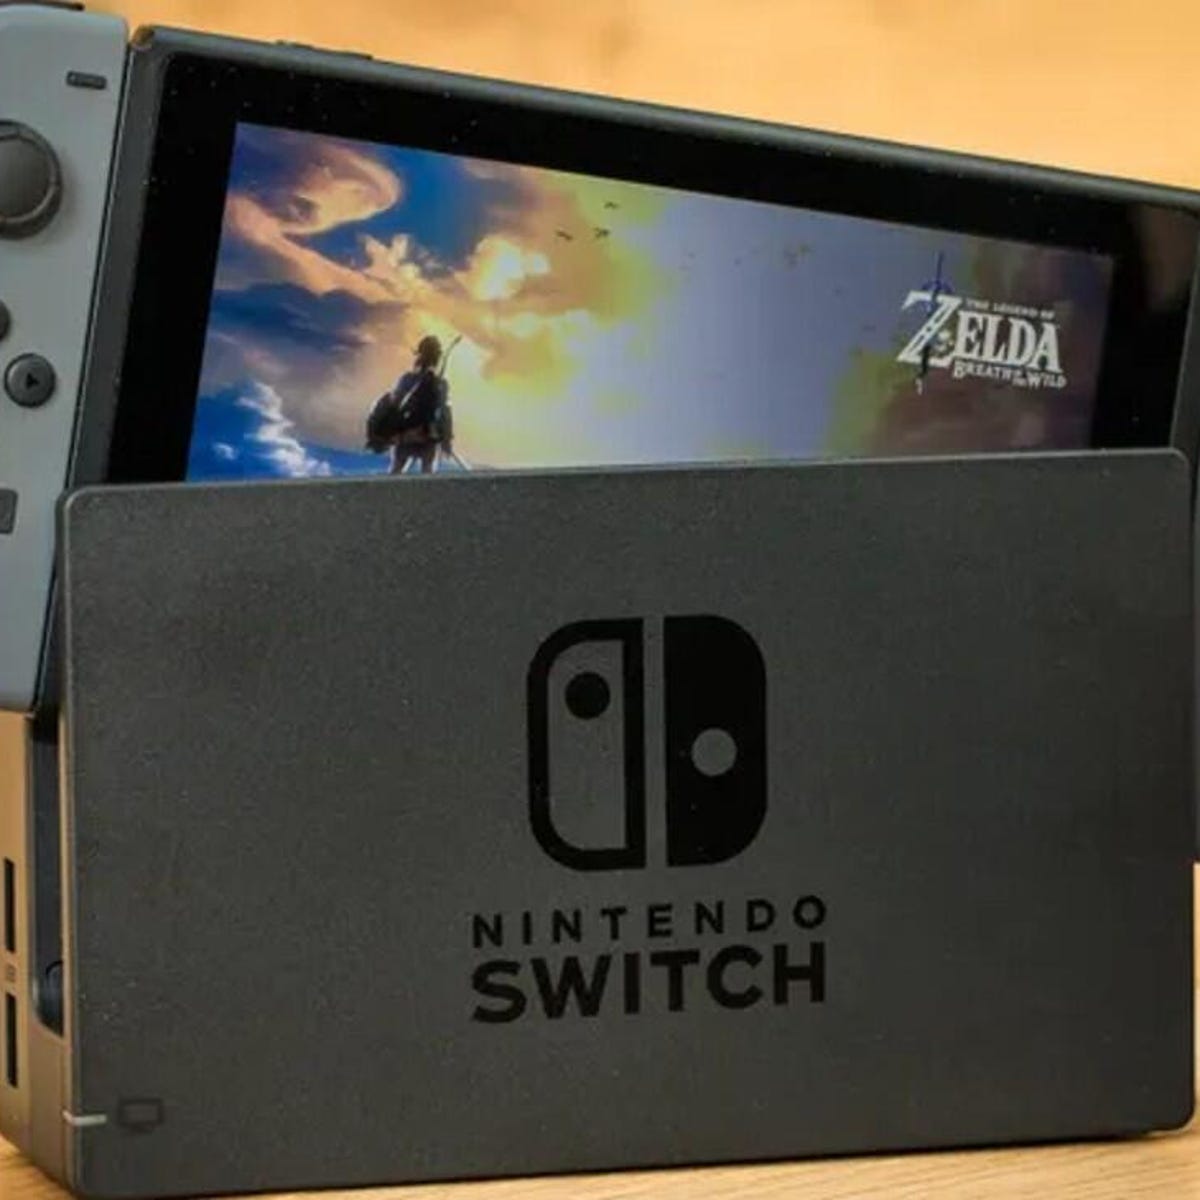 How to connect a Nintendo Switch to your TV